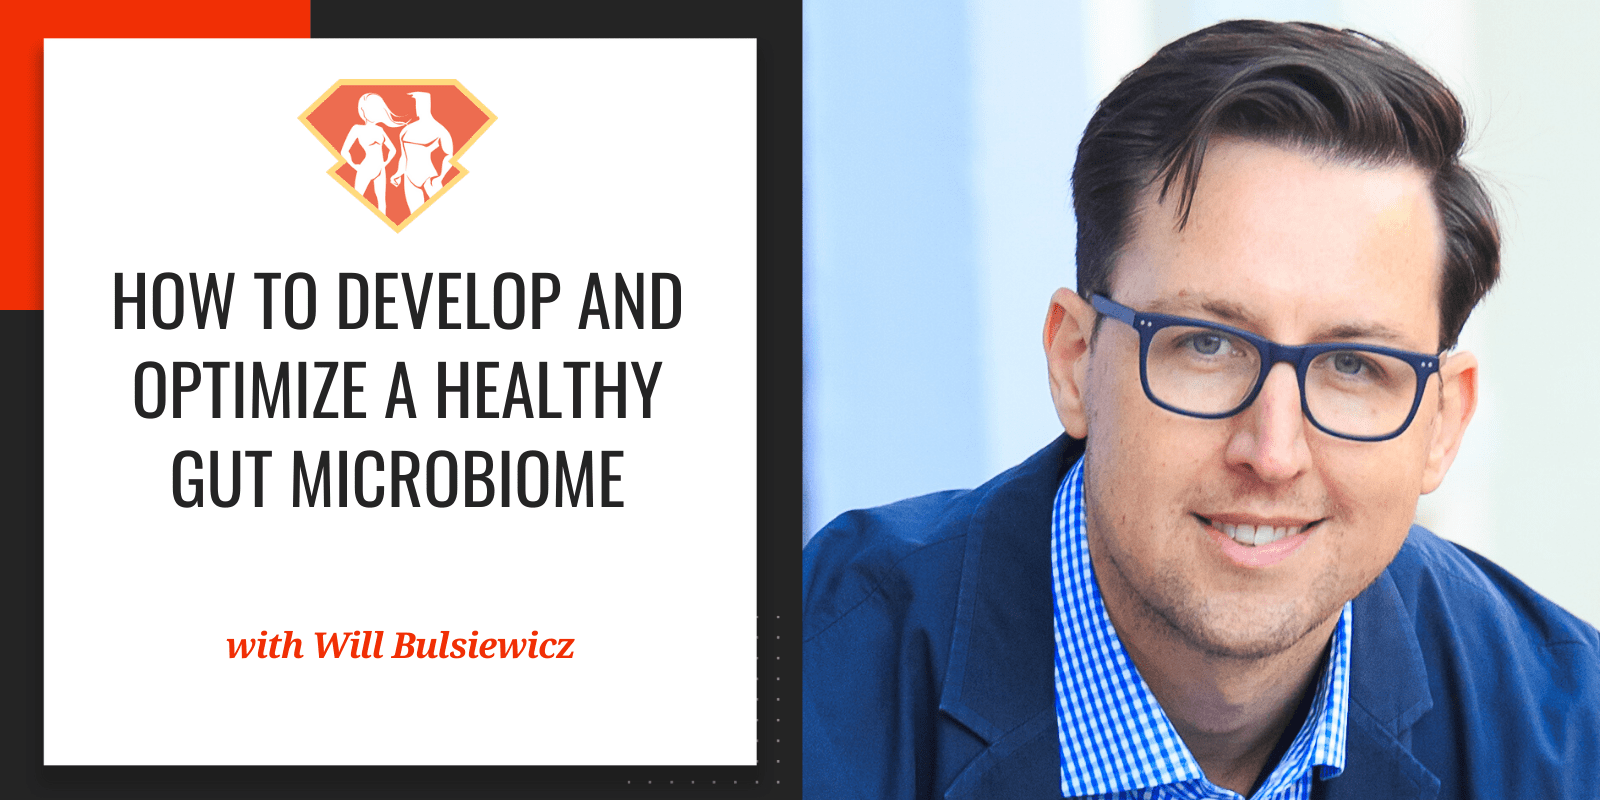 Dr. Will Bulsiewicz On How To Develop And Optimize A Healthy Gut Microbiome